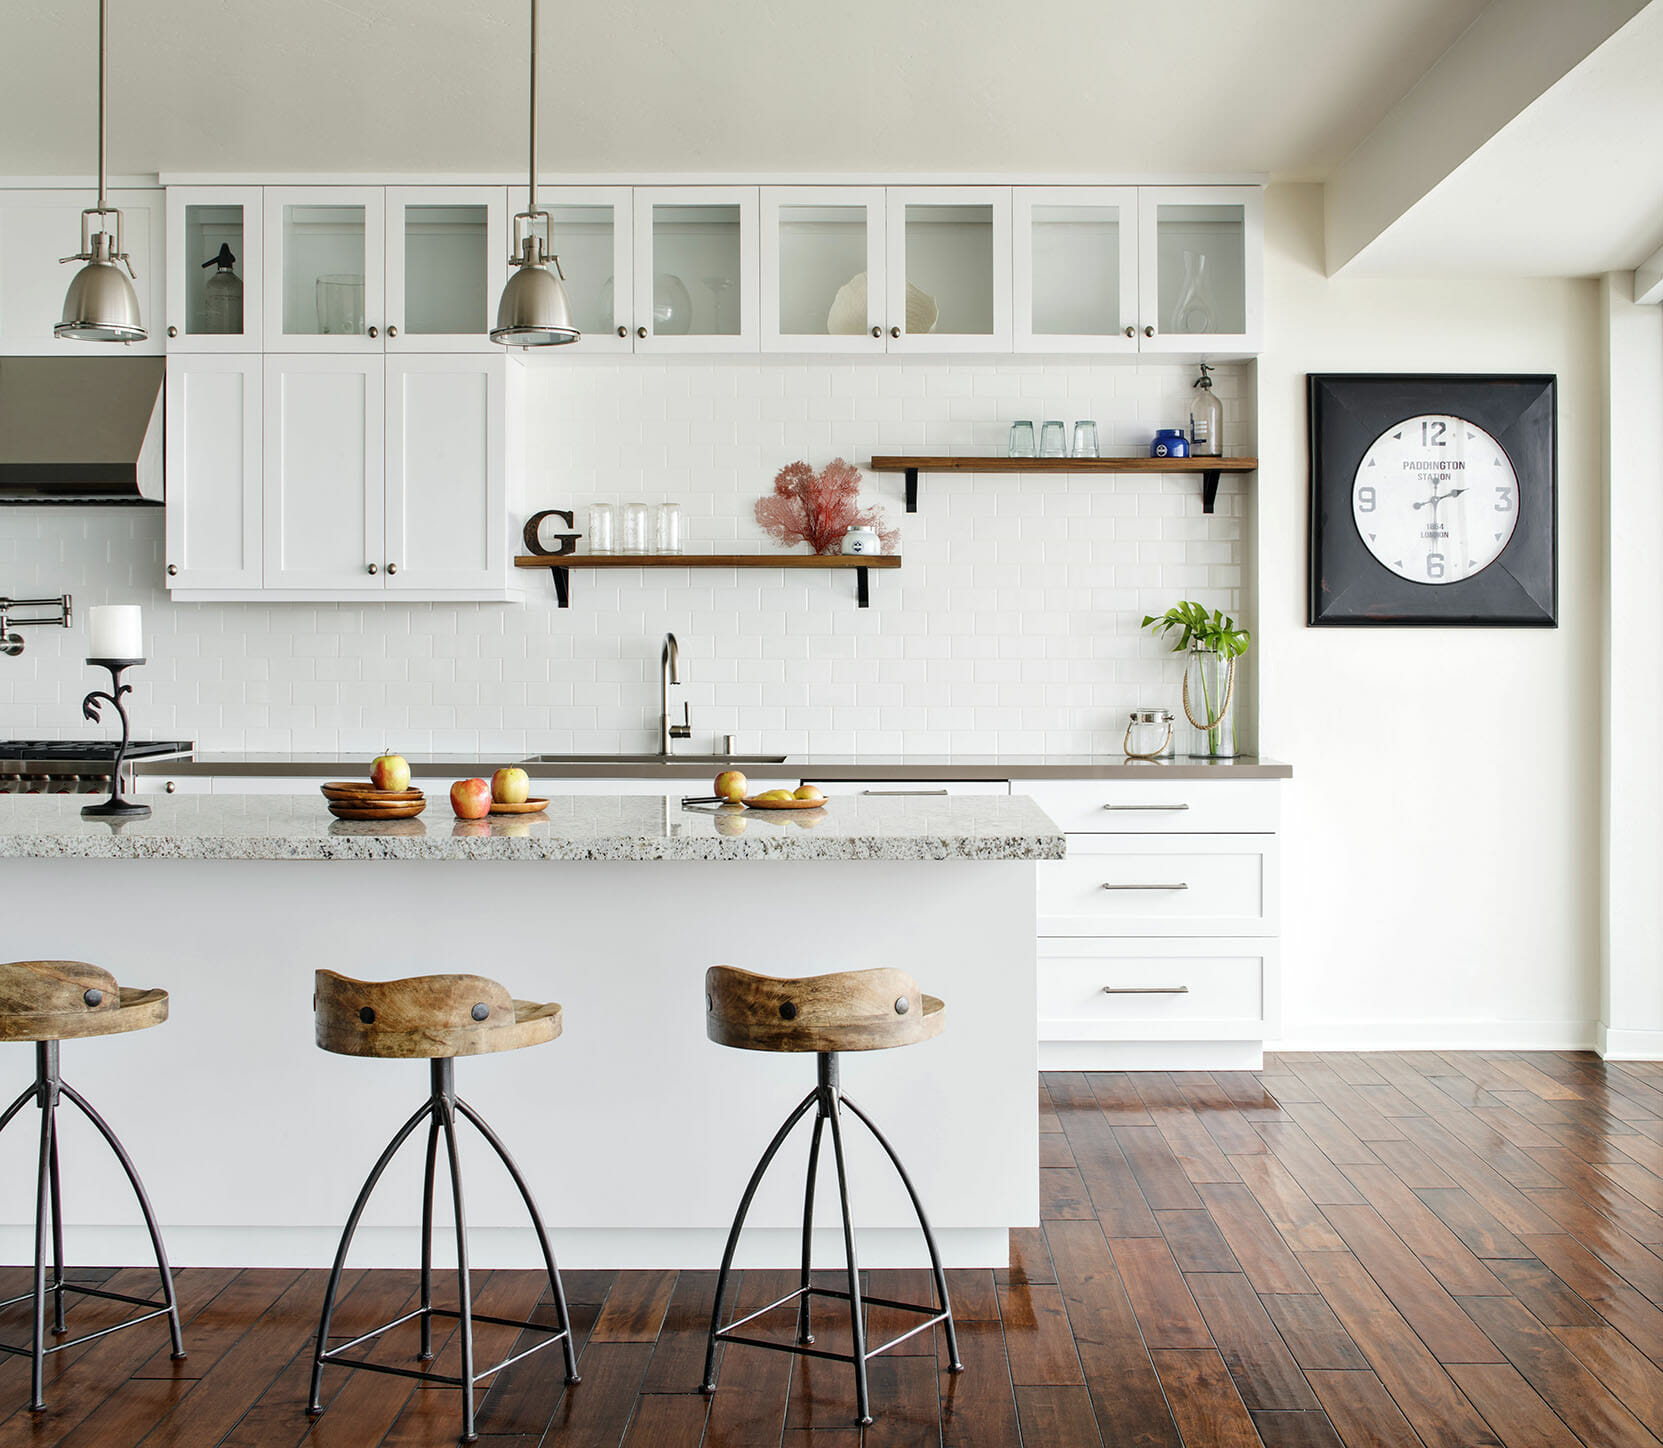 Kitchen Trends 2023: Design Pro Ideas You'll Want to Steal - Decorilla